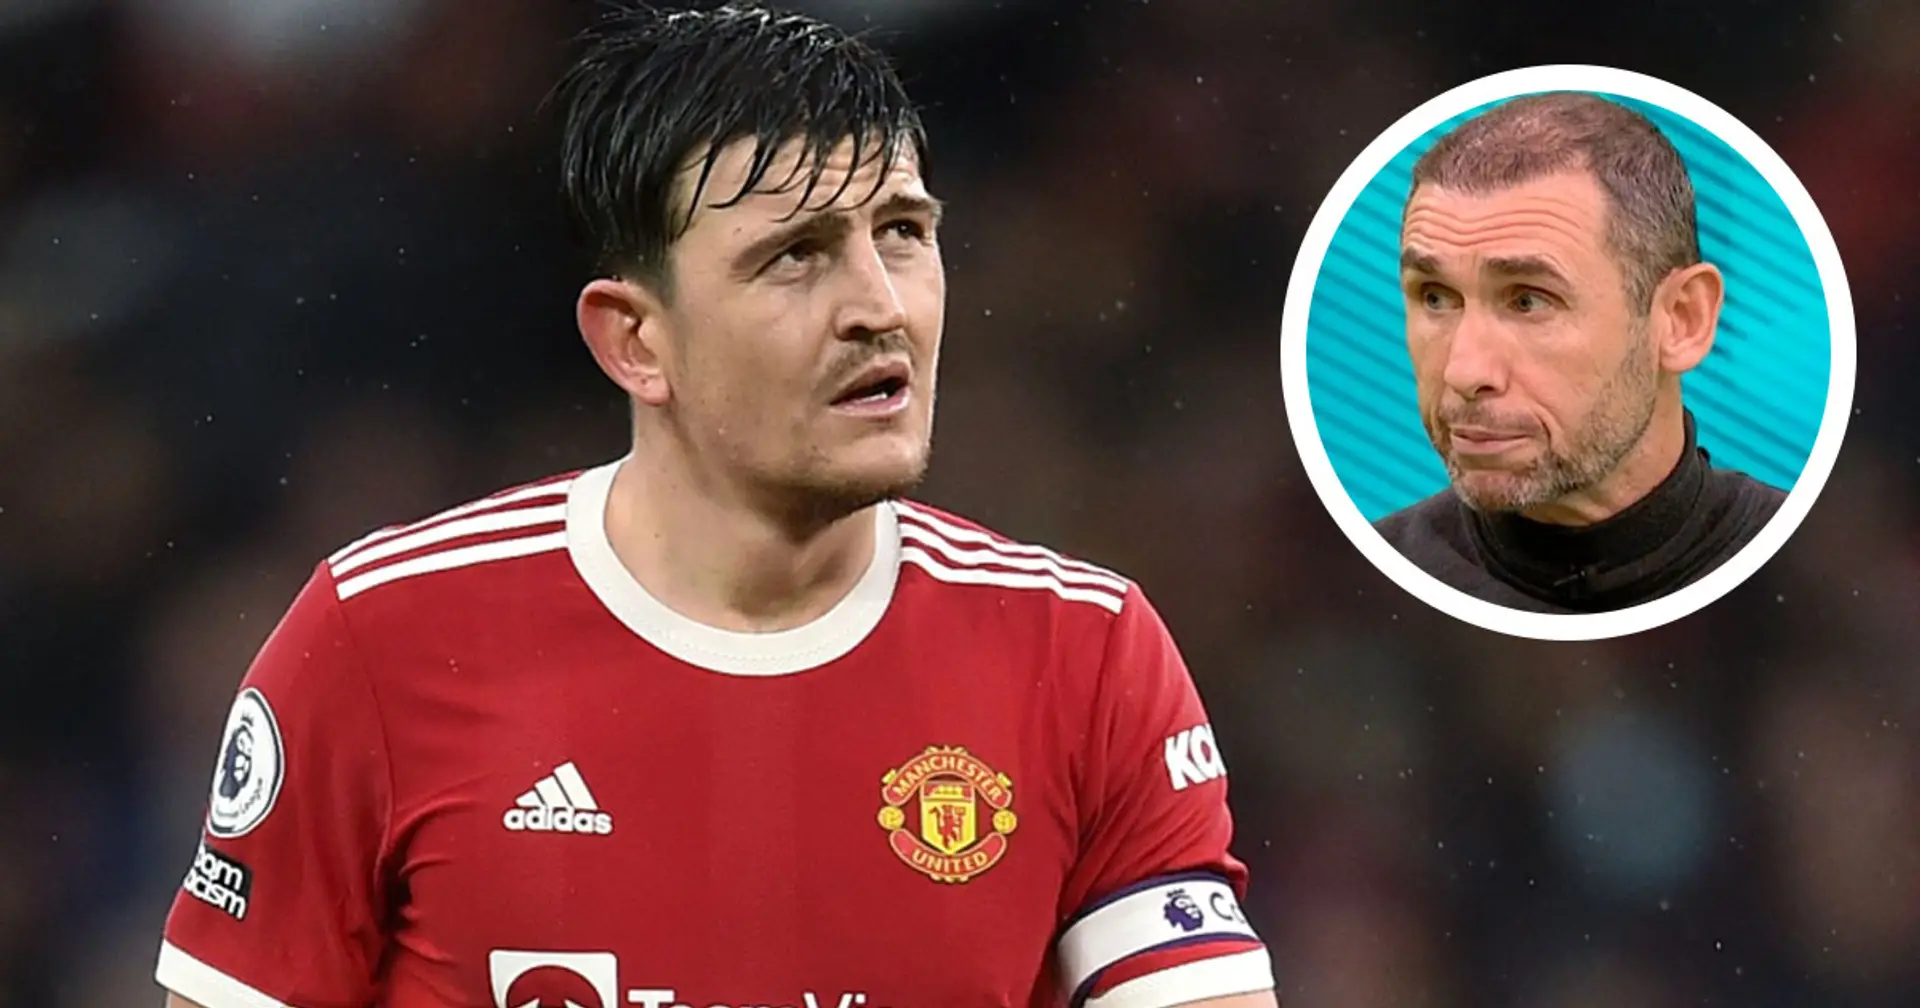 'Comments about him have fallen into the abuse category': Ex-Arsenal man Keown defends Maguire from ‘disrespectful’ criticism